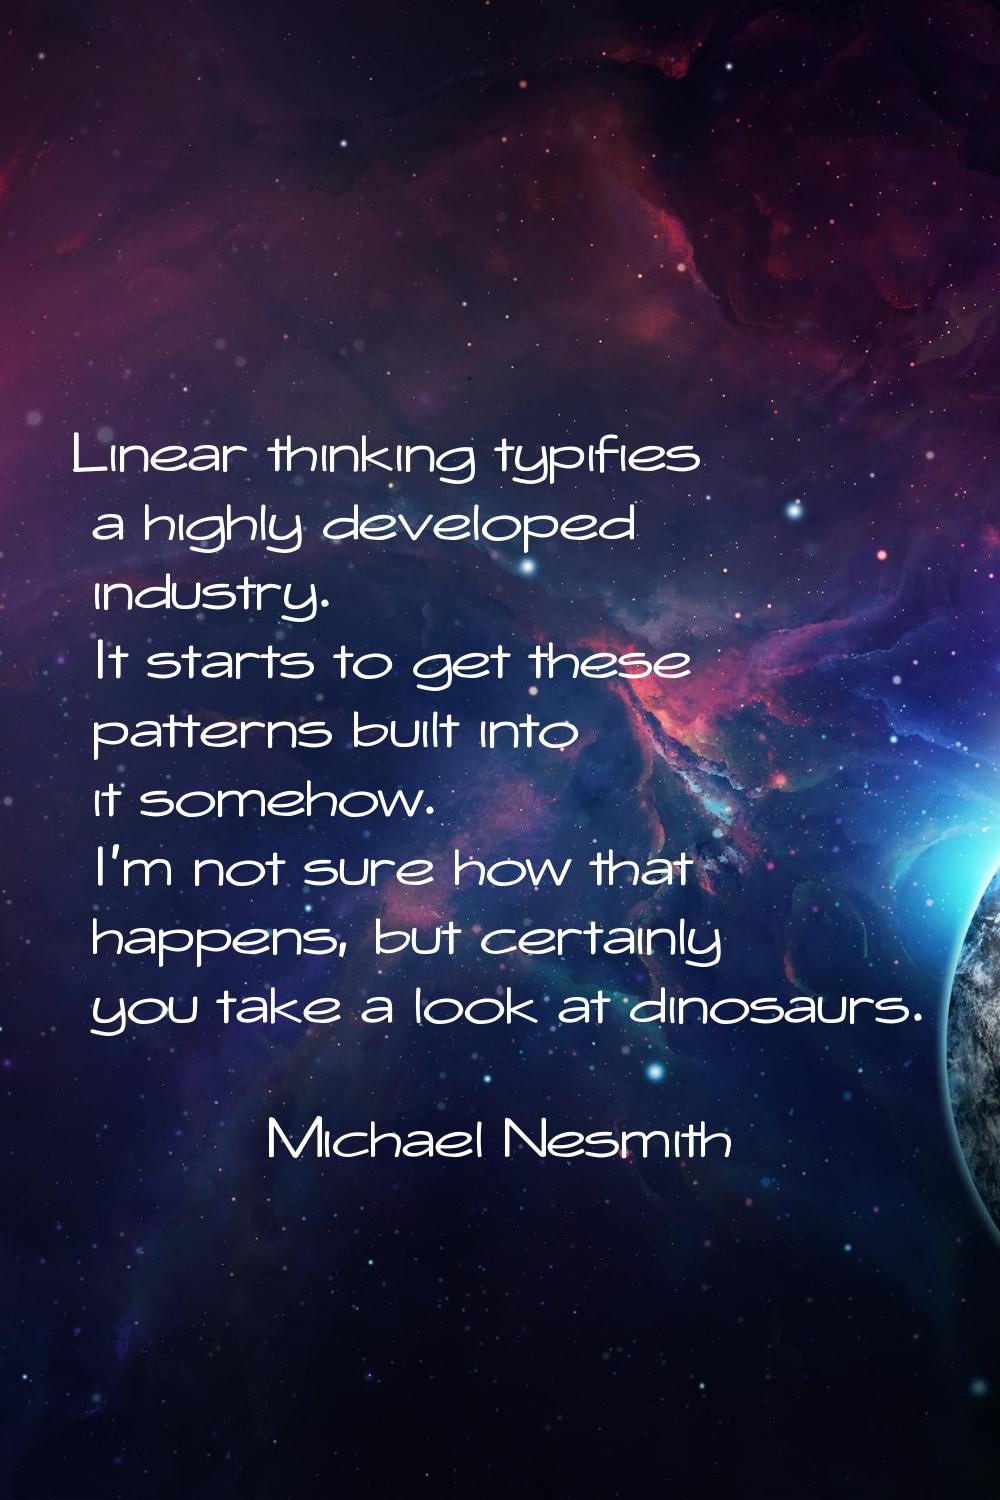 Linear thinking typifies a highly developed industry. It starts to get these patterns built into it